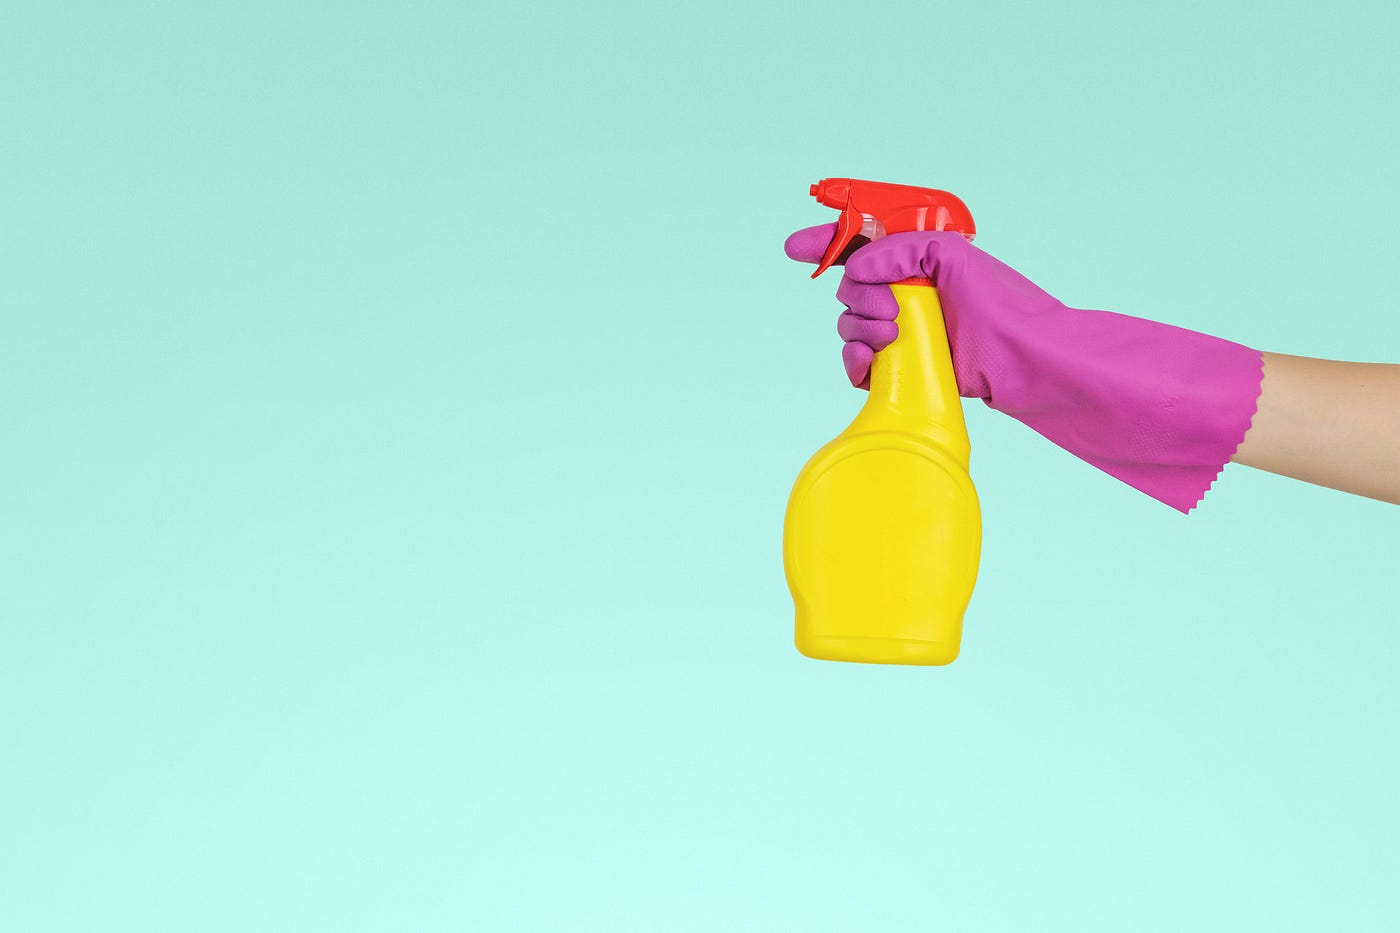 A gloved hand holding a spray bottle.